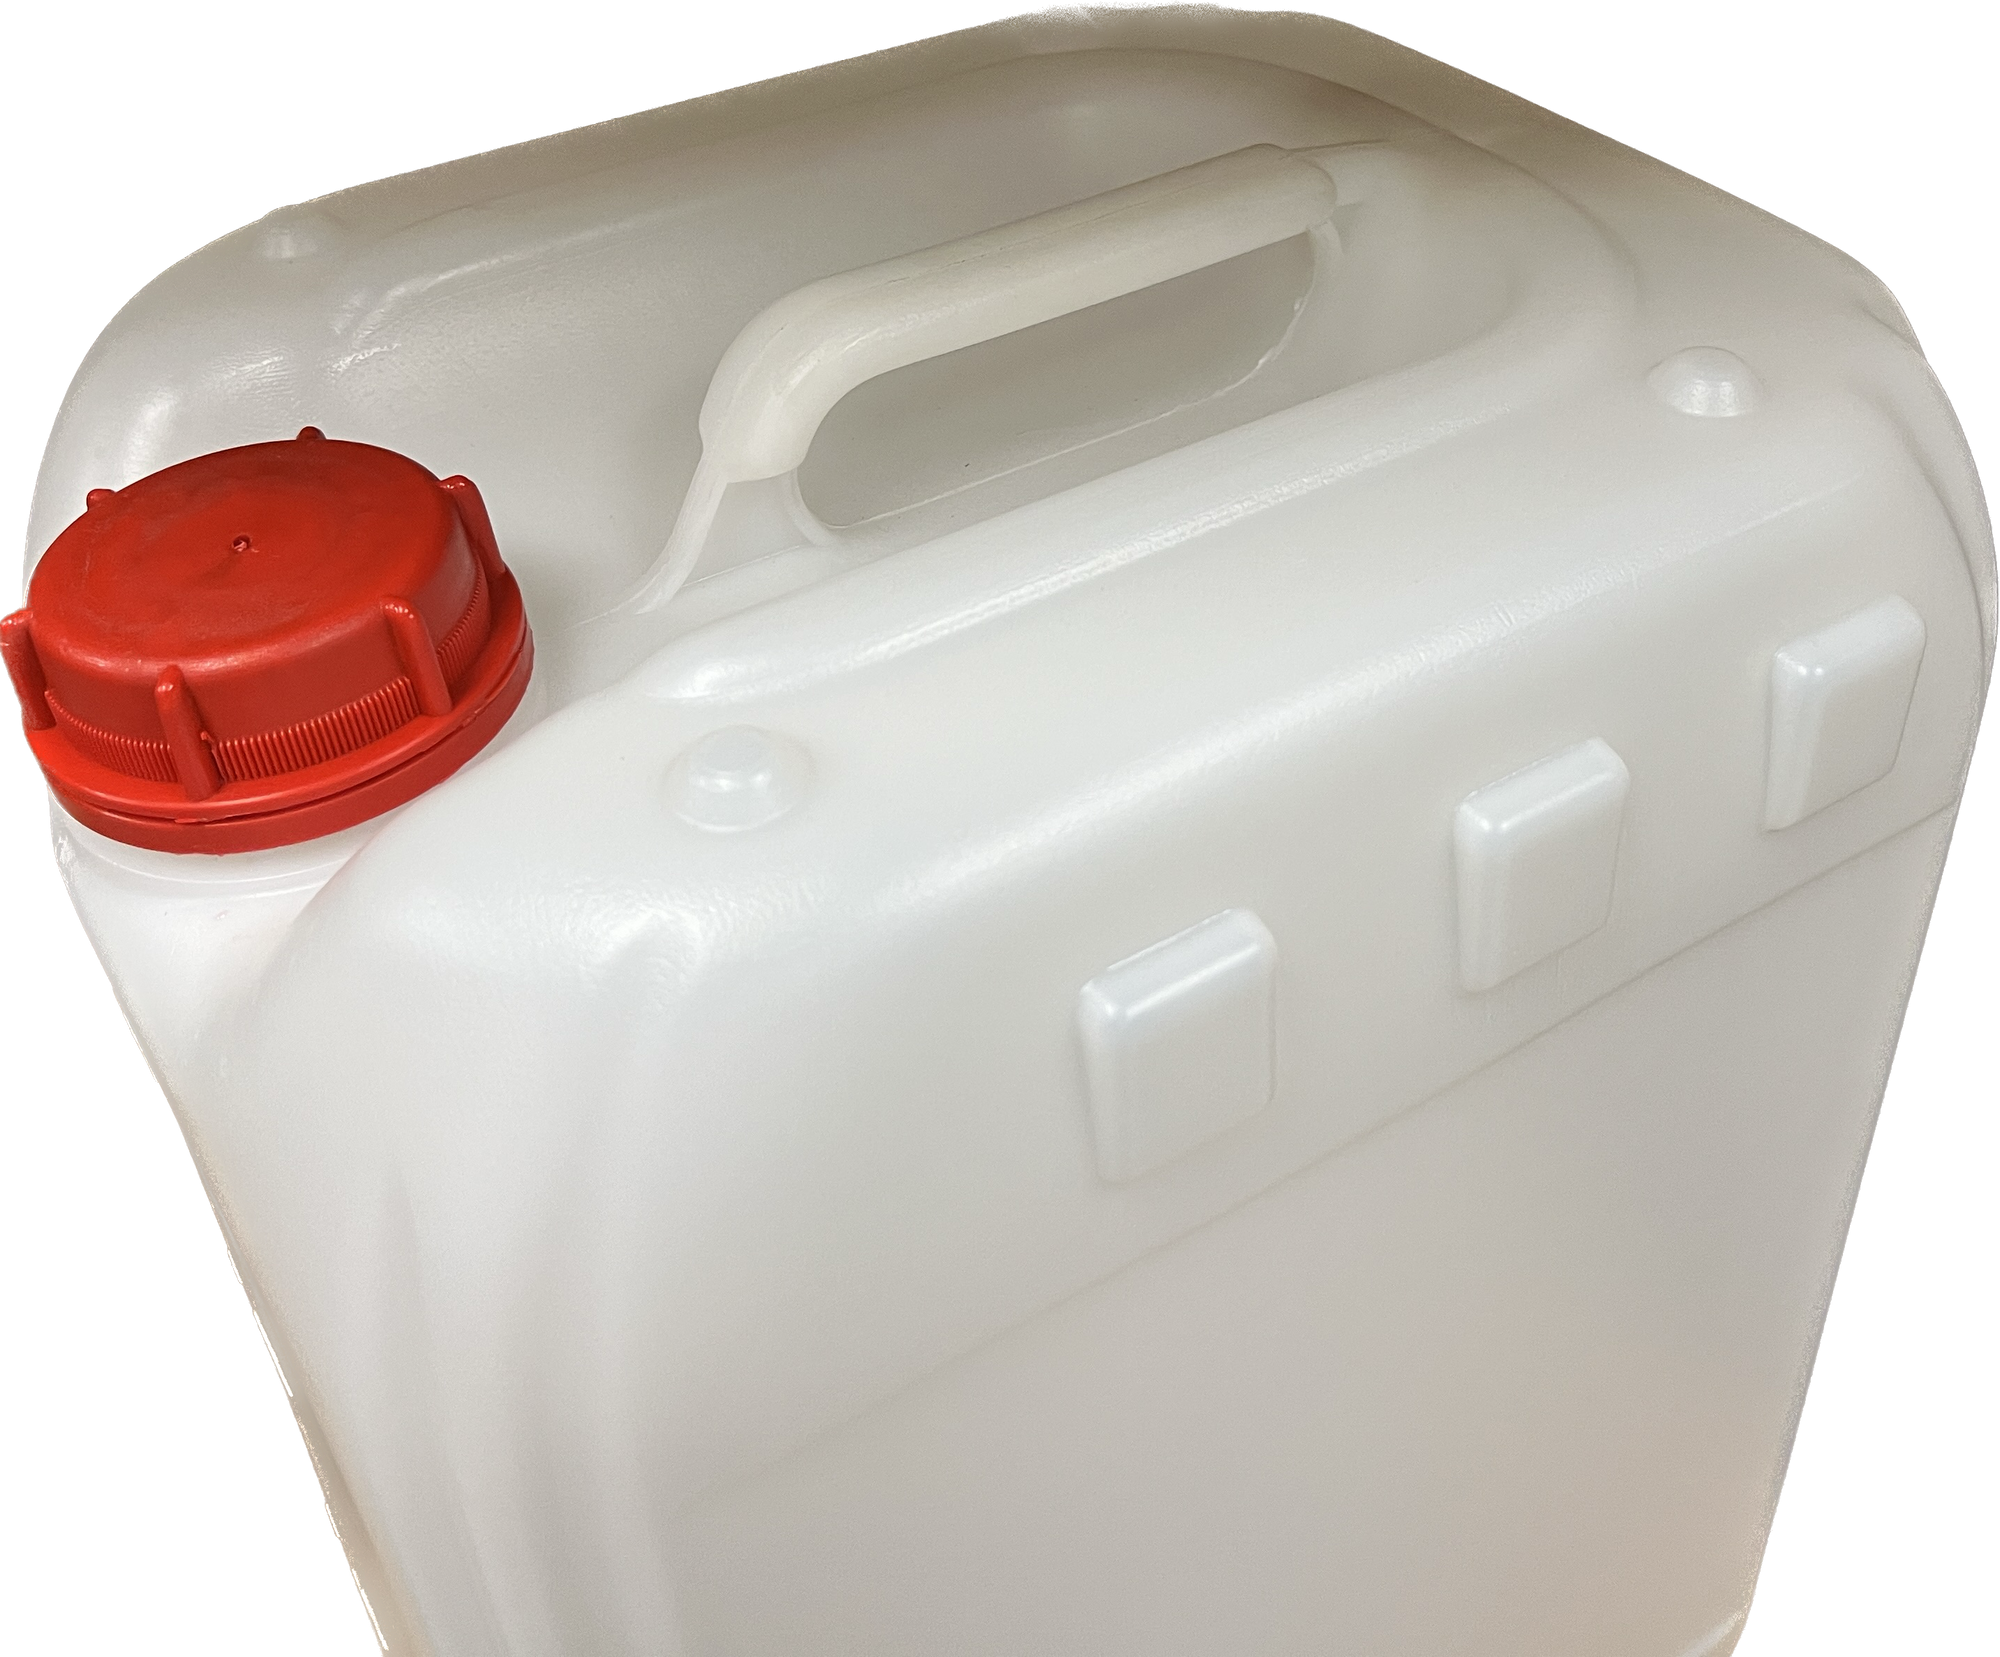 5.3 gal Natural Leakproof HDPE Plastic Jerry Can w DIN51 Red Tamper-Evident Cap